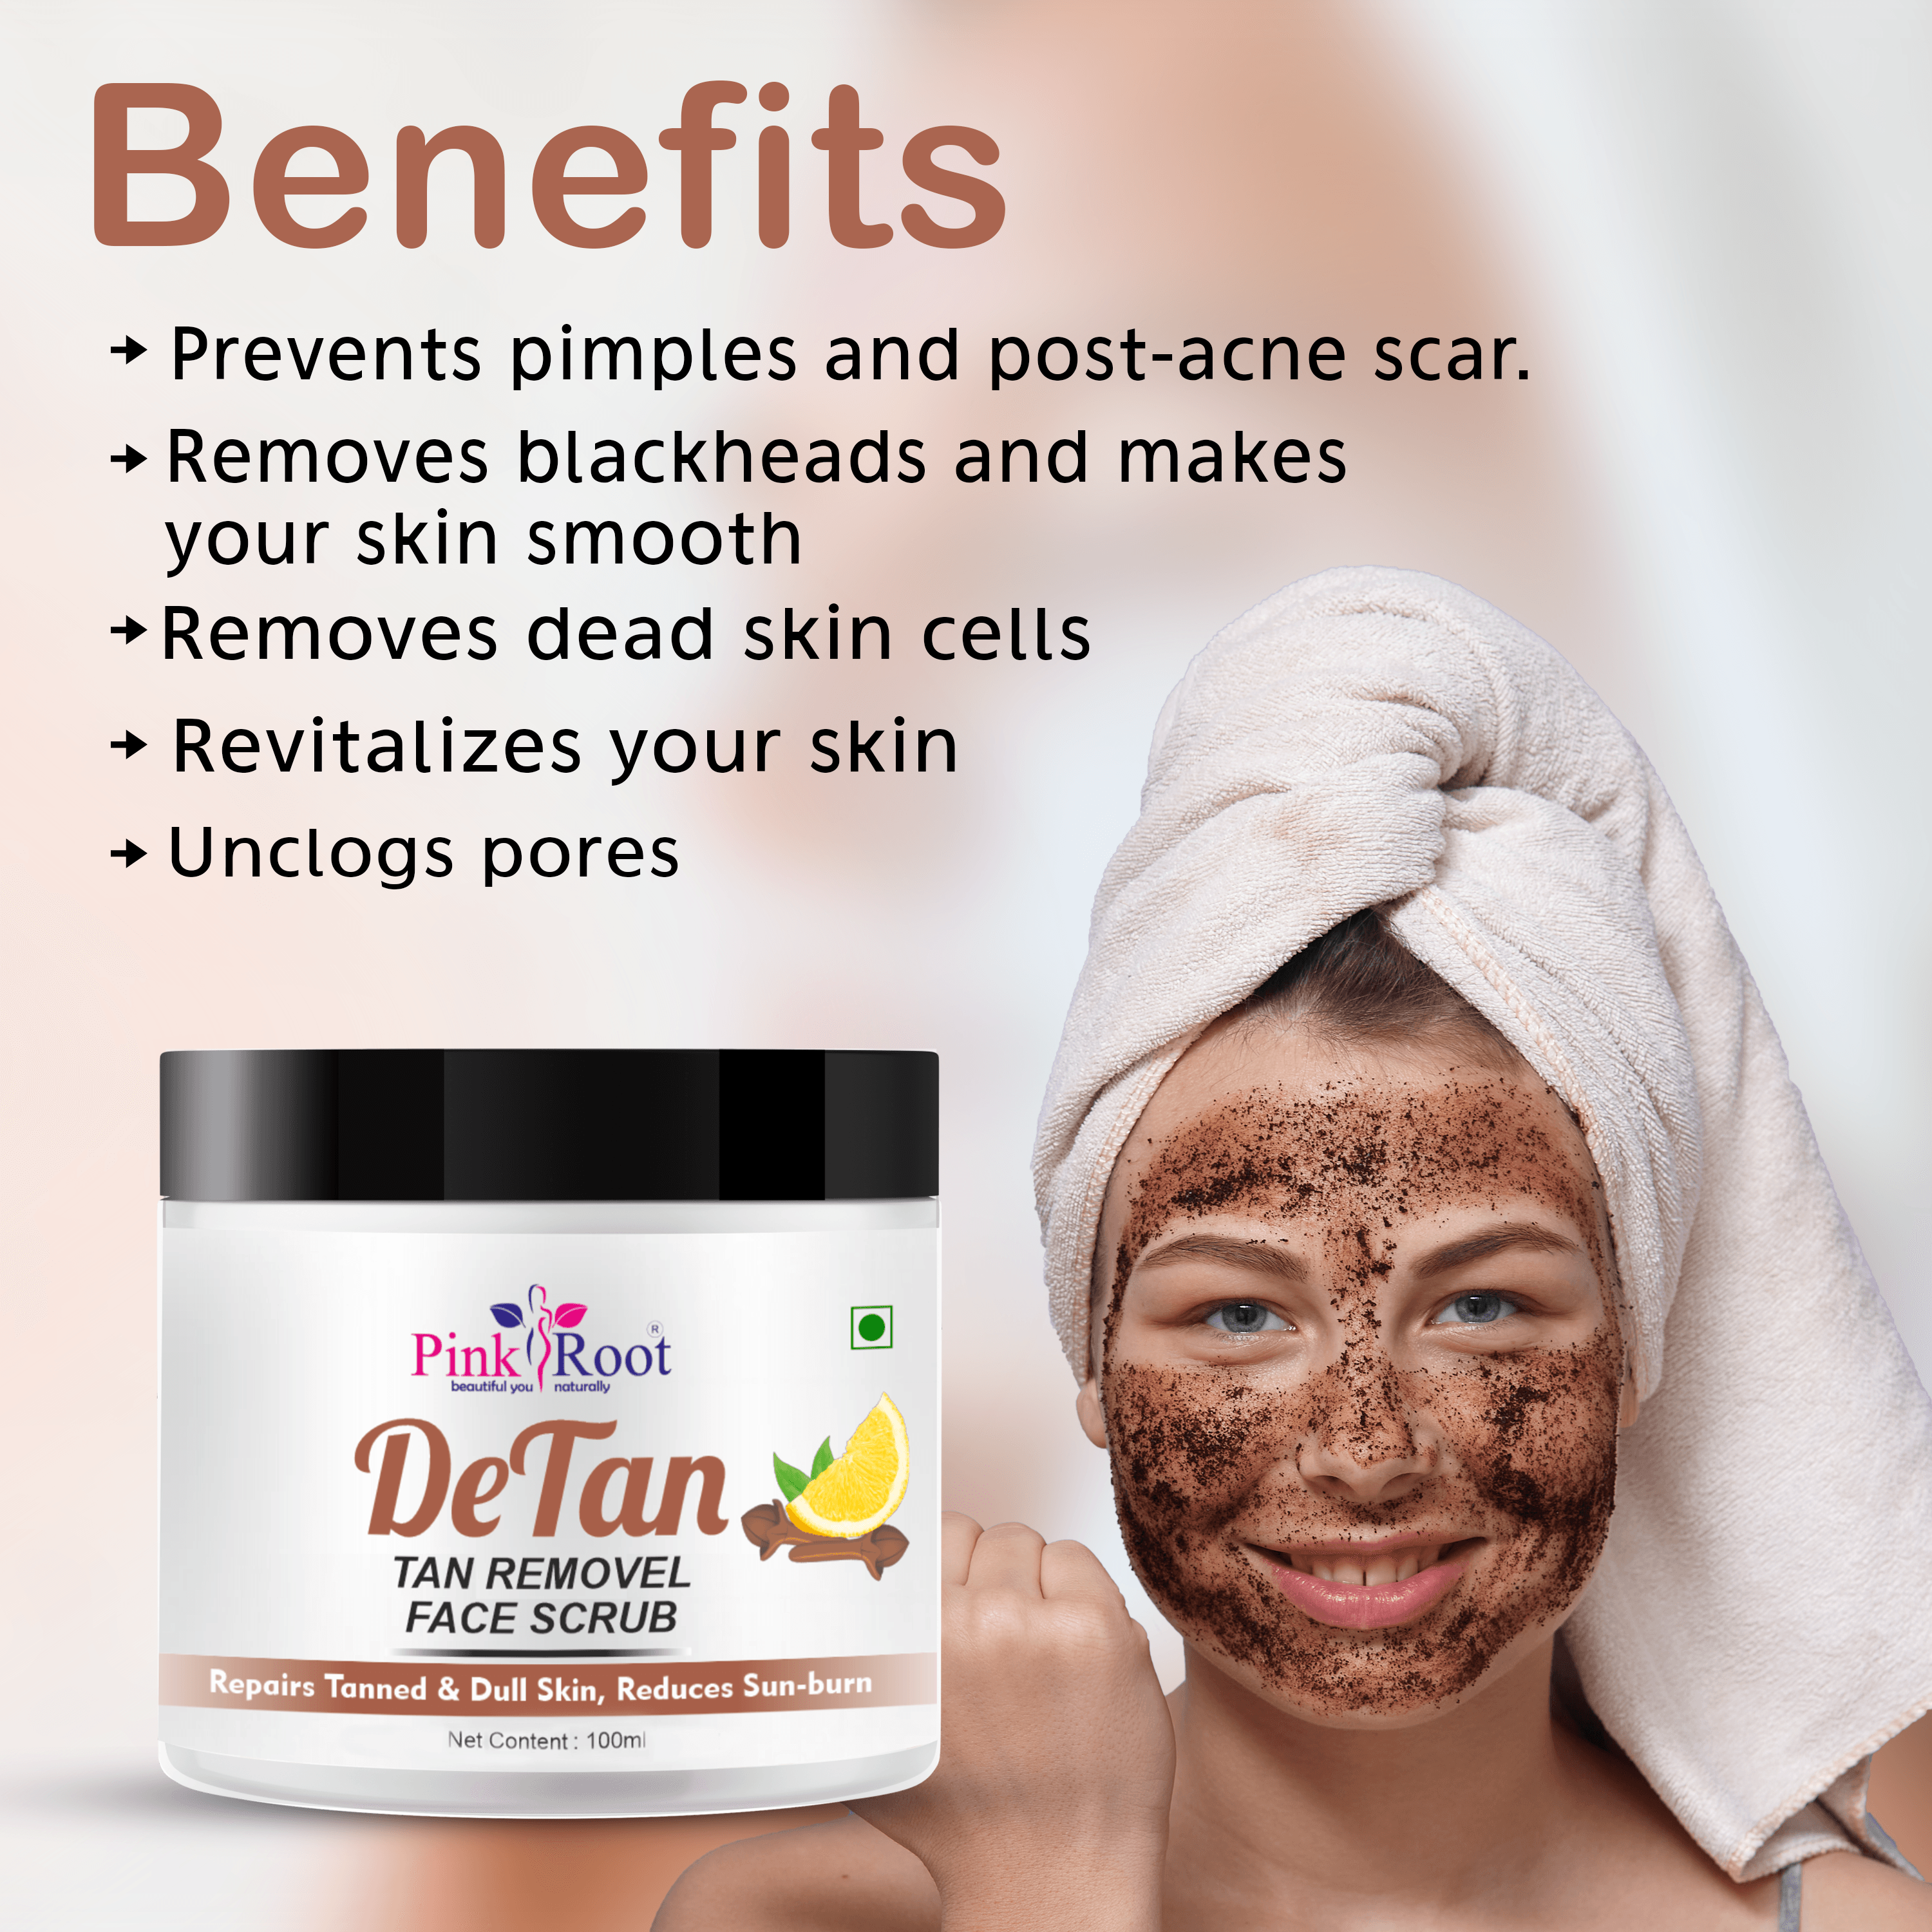 Pink Root Detan Face Scrub 100ml, Enriched with Lemon Extract & Clove Oil, helps in Tan Removal, Blackheads and gives smooth, clean & dirt free skin - Pink Root